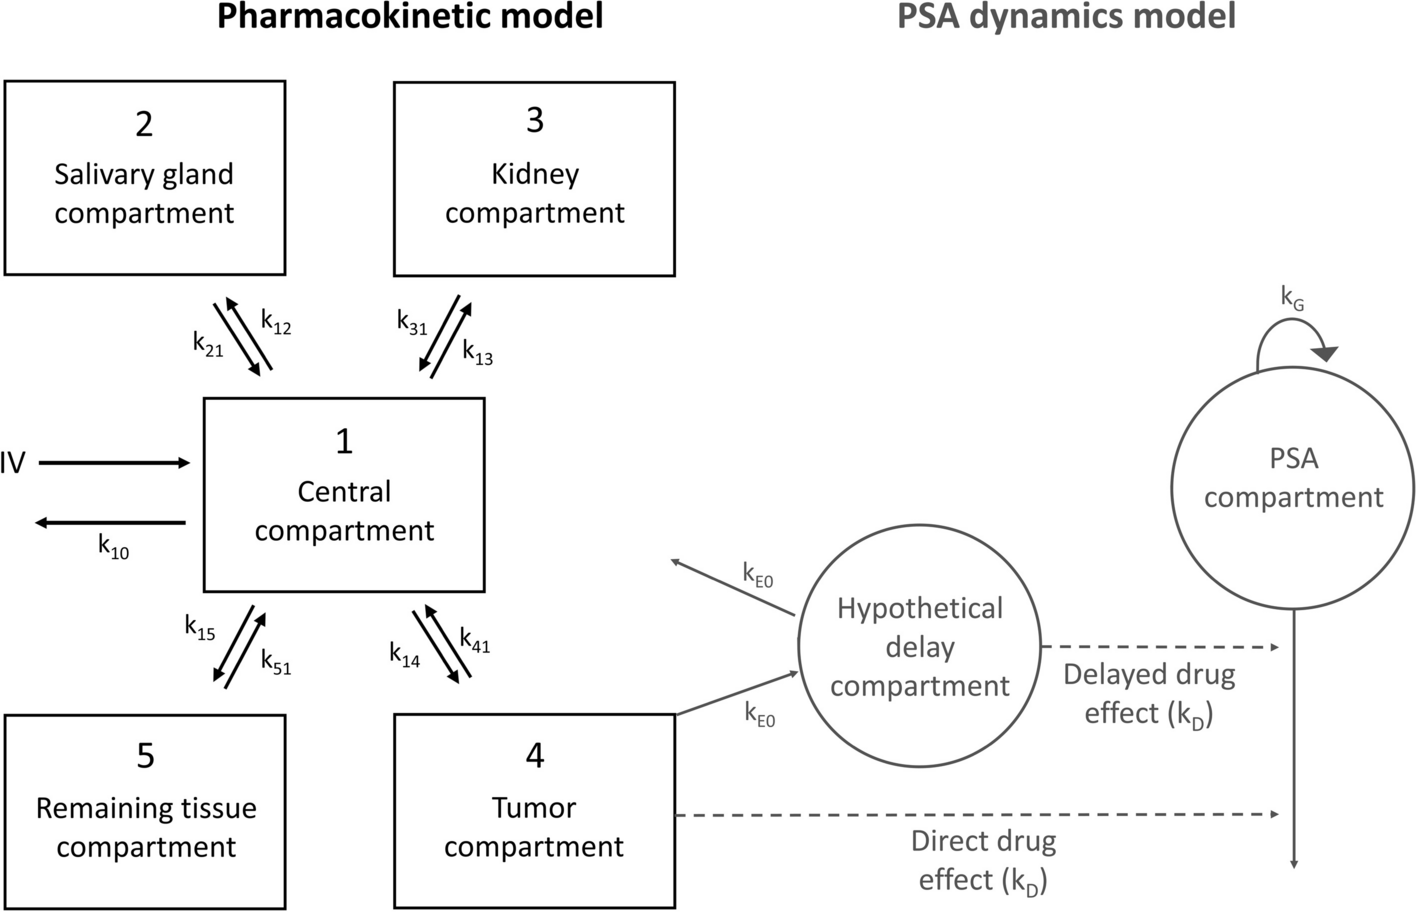 Quantification of biochemical PSA dynamics after radioligand therapy with [177Lu]Lu-PSMA-I&T using a population pharmacokinetic/pharmacodynamic model